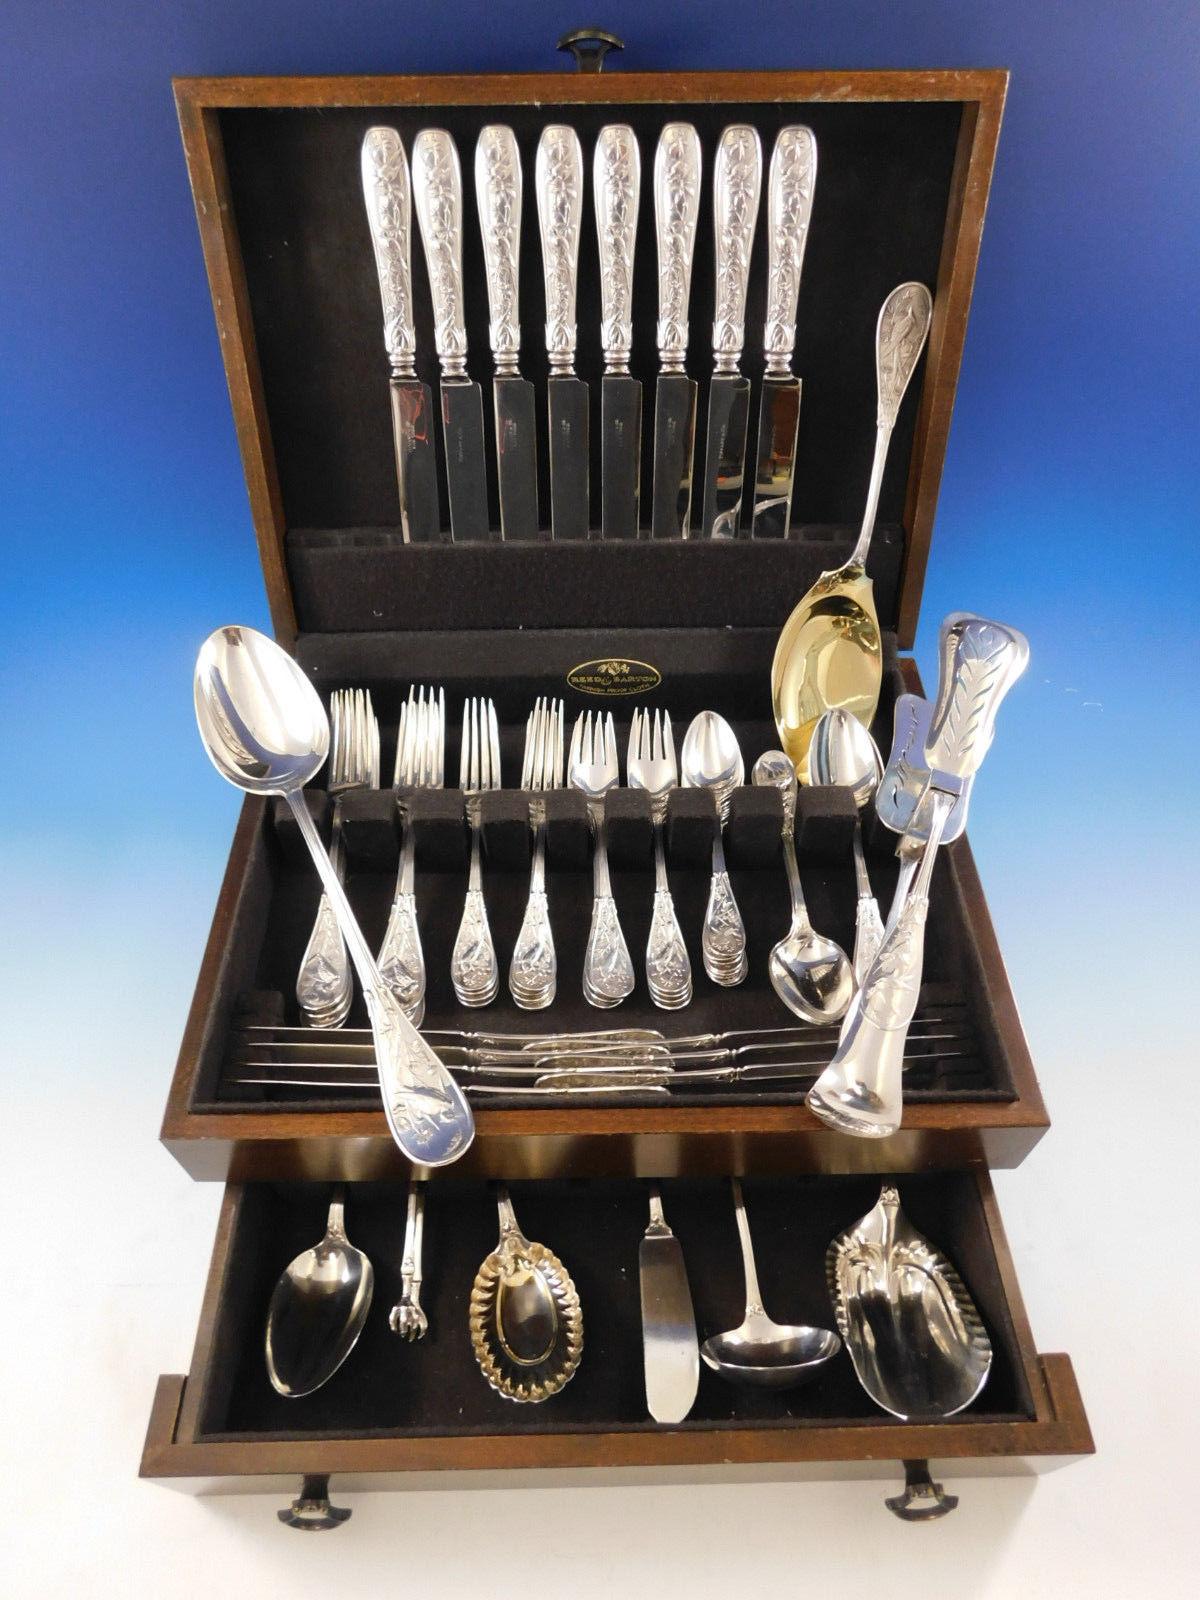 Exceptional antique JAPANESE BY TIFFANY & CO. sterling silver Dinner Flatware set, 65 pieces. This set includes:

8 DINNER SIZE KNIVES, 10 1/4